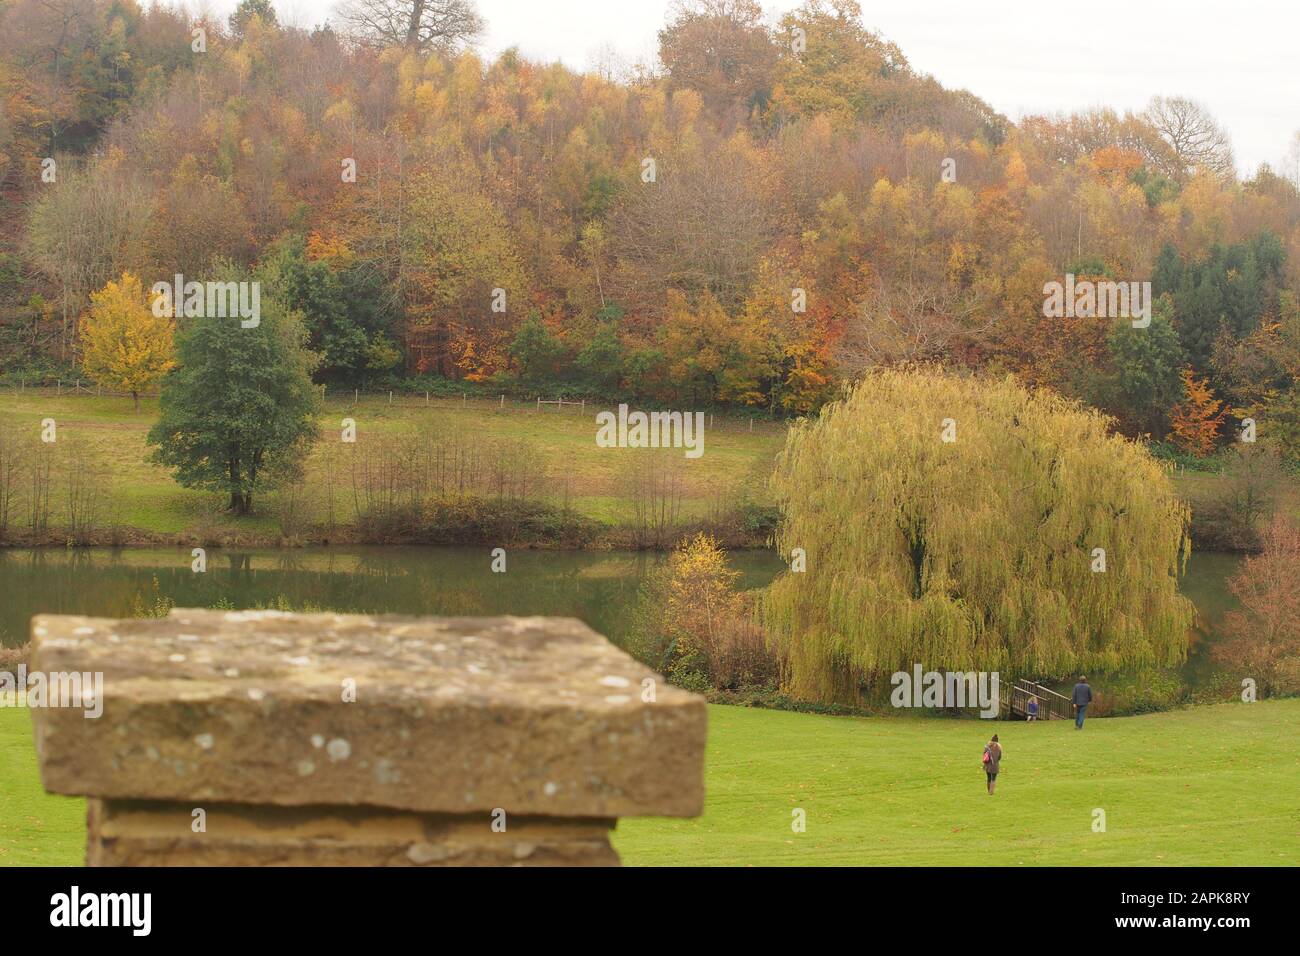 A view looking over a stone garden wall to sloping grass with a young family down to a lake with autumn trees and a woodland beyond Stock Photo